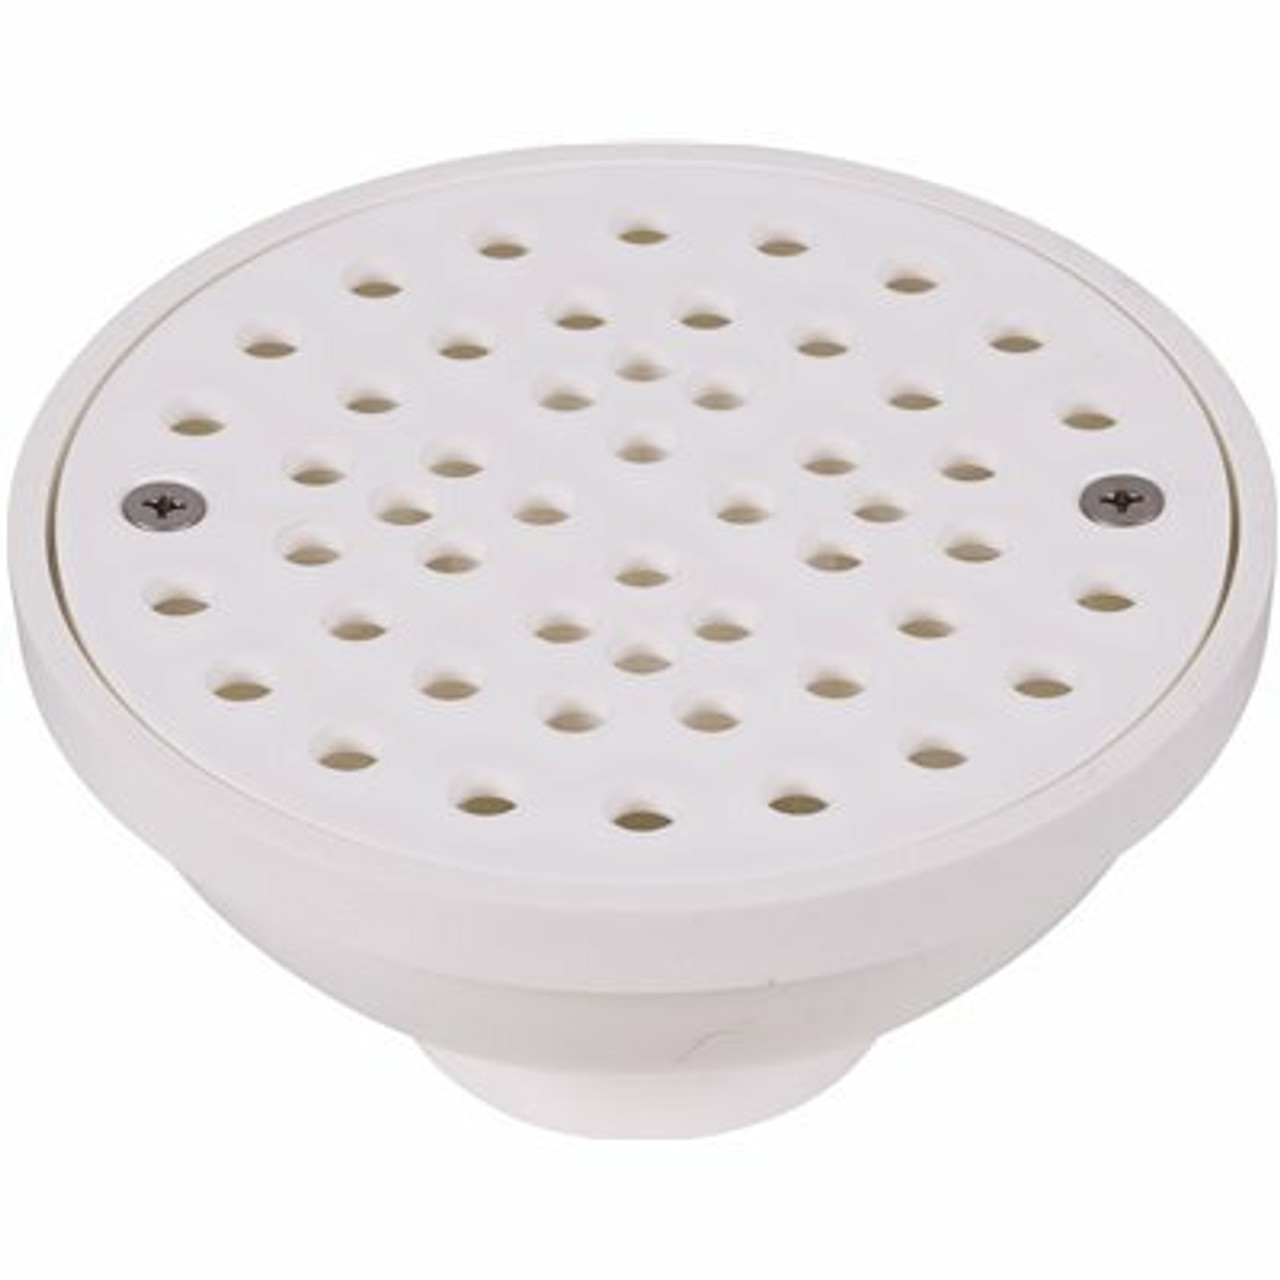 Oatey Round White Pvc Area Floor Drain With Screw-In Drain Cover